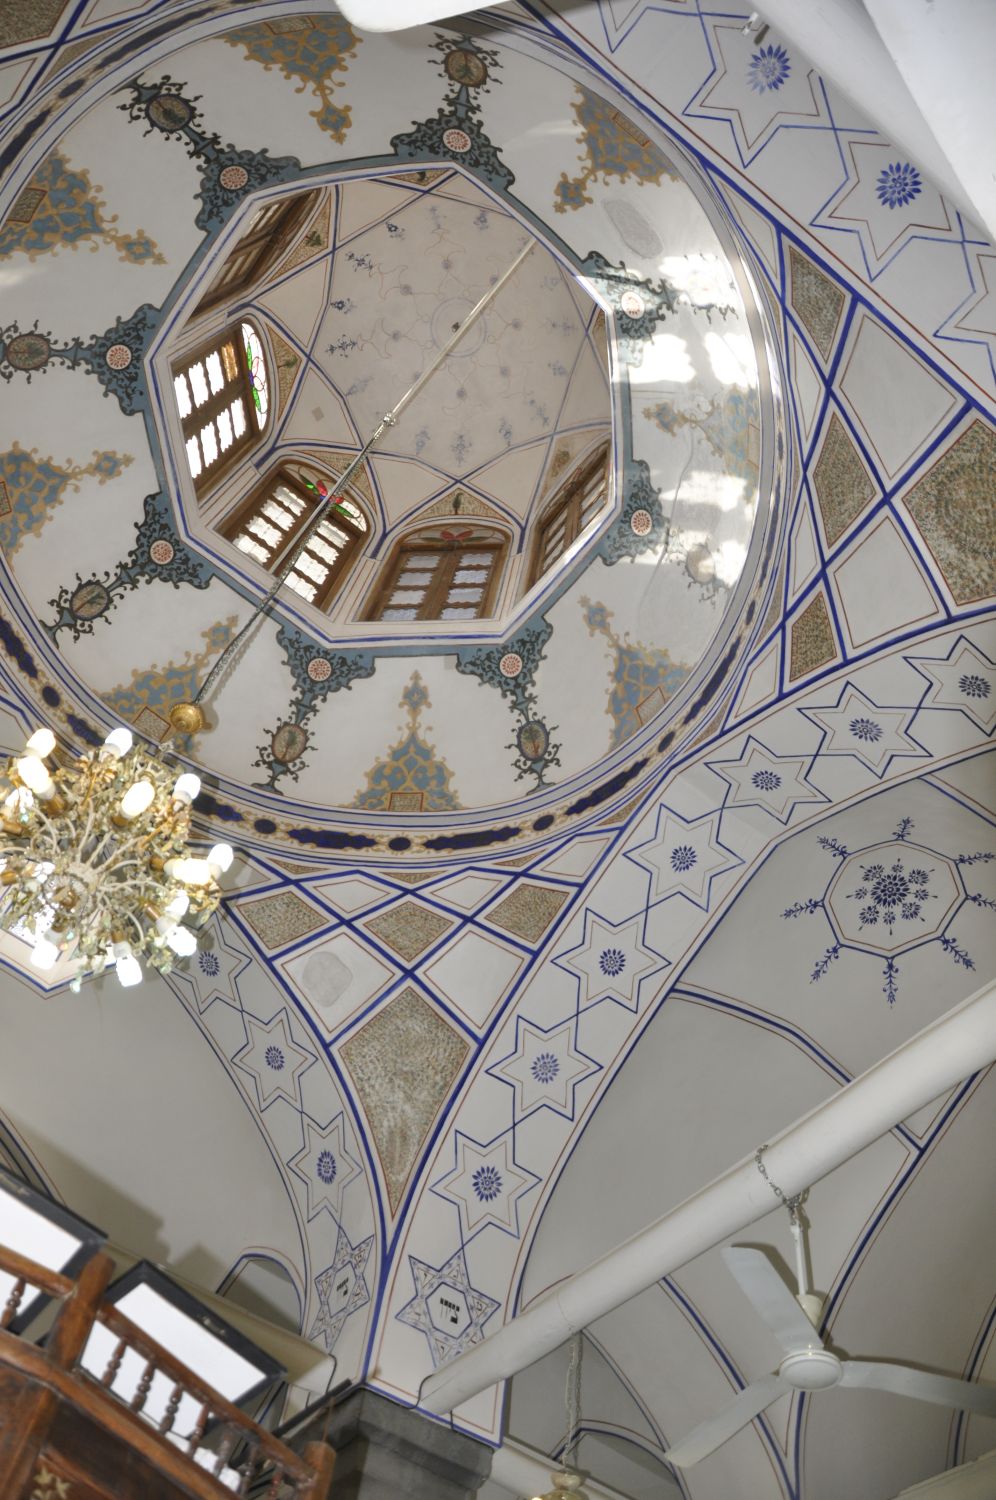 Karbandi and ornamentation in central skylight.